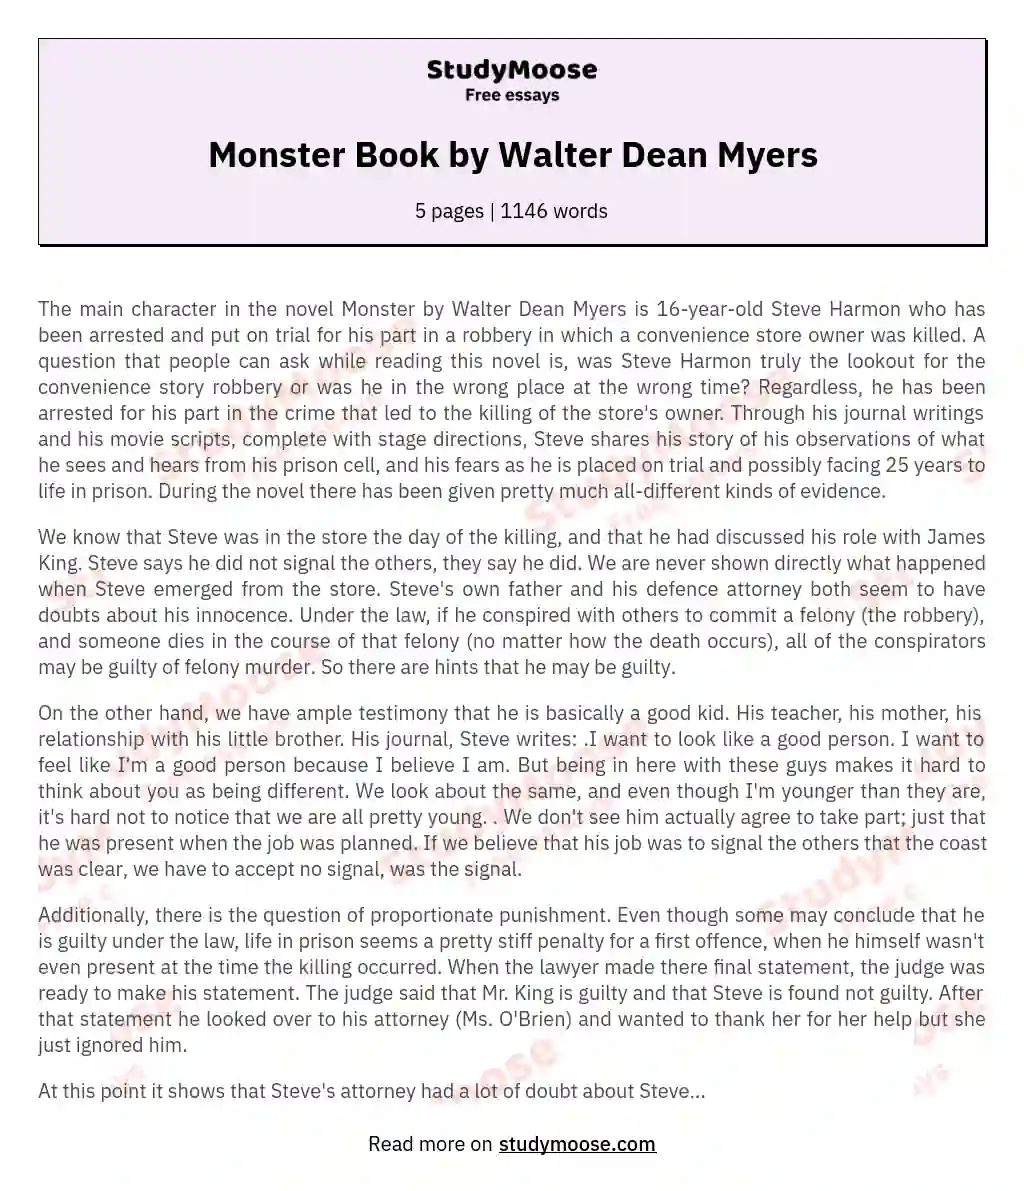 Monster Book by Walter Dean Myers essay